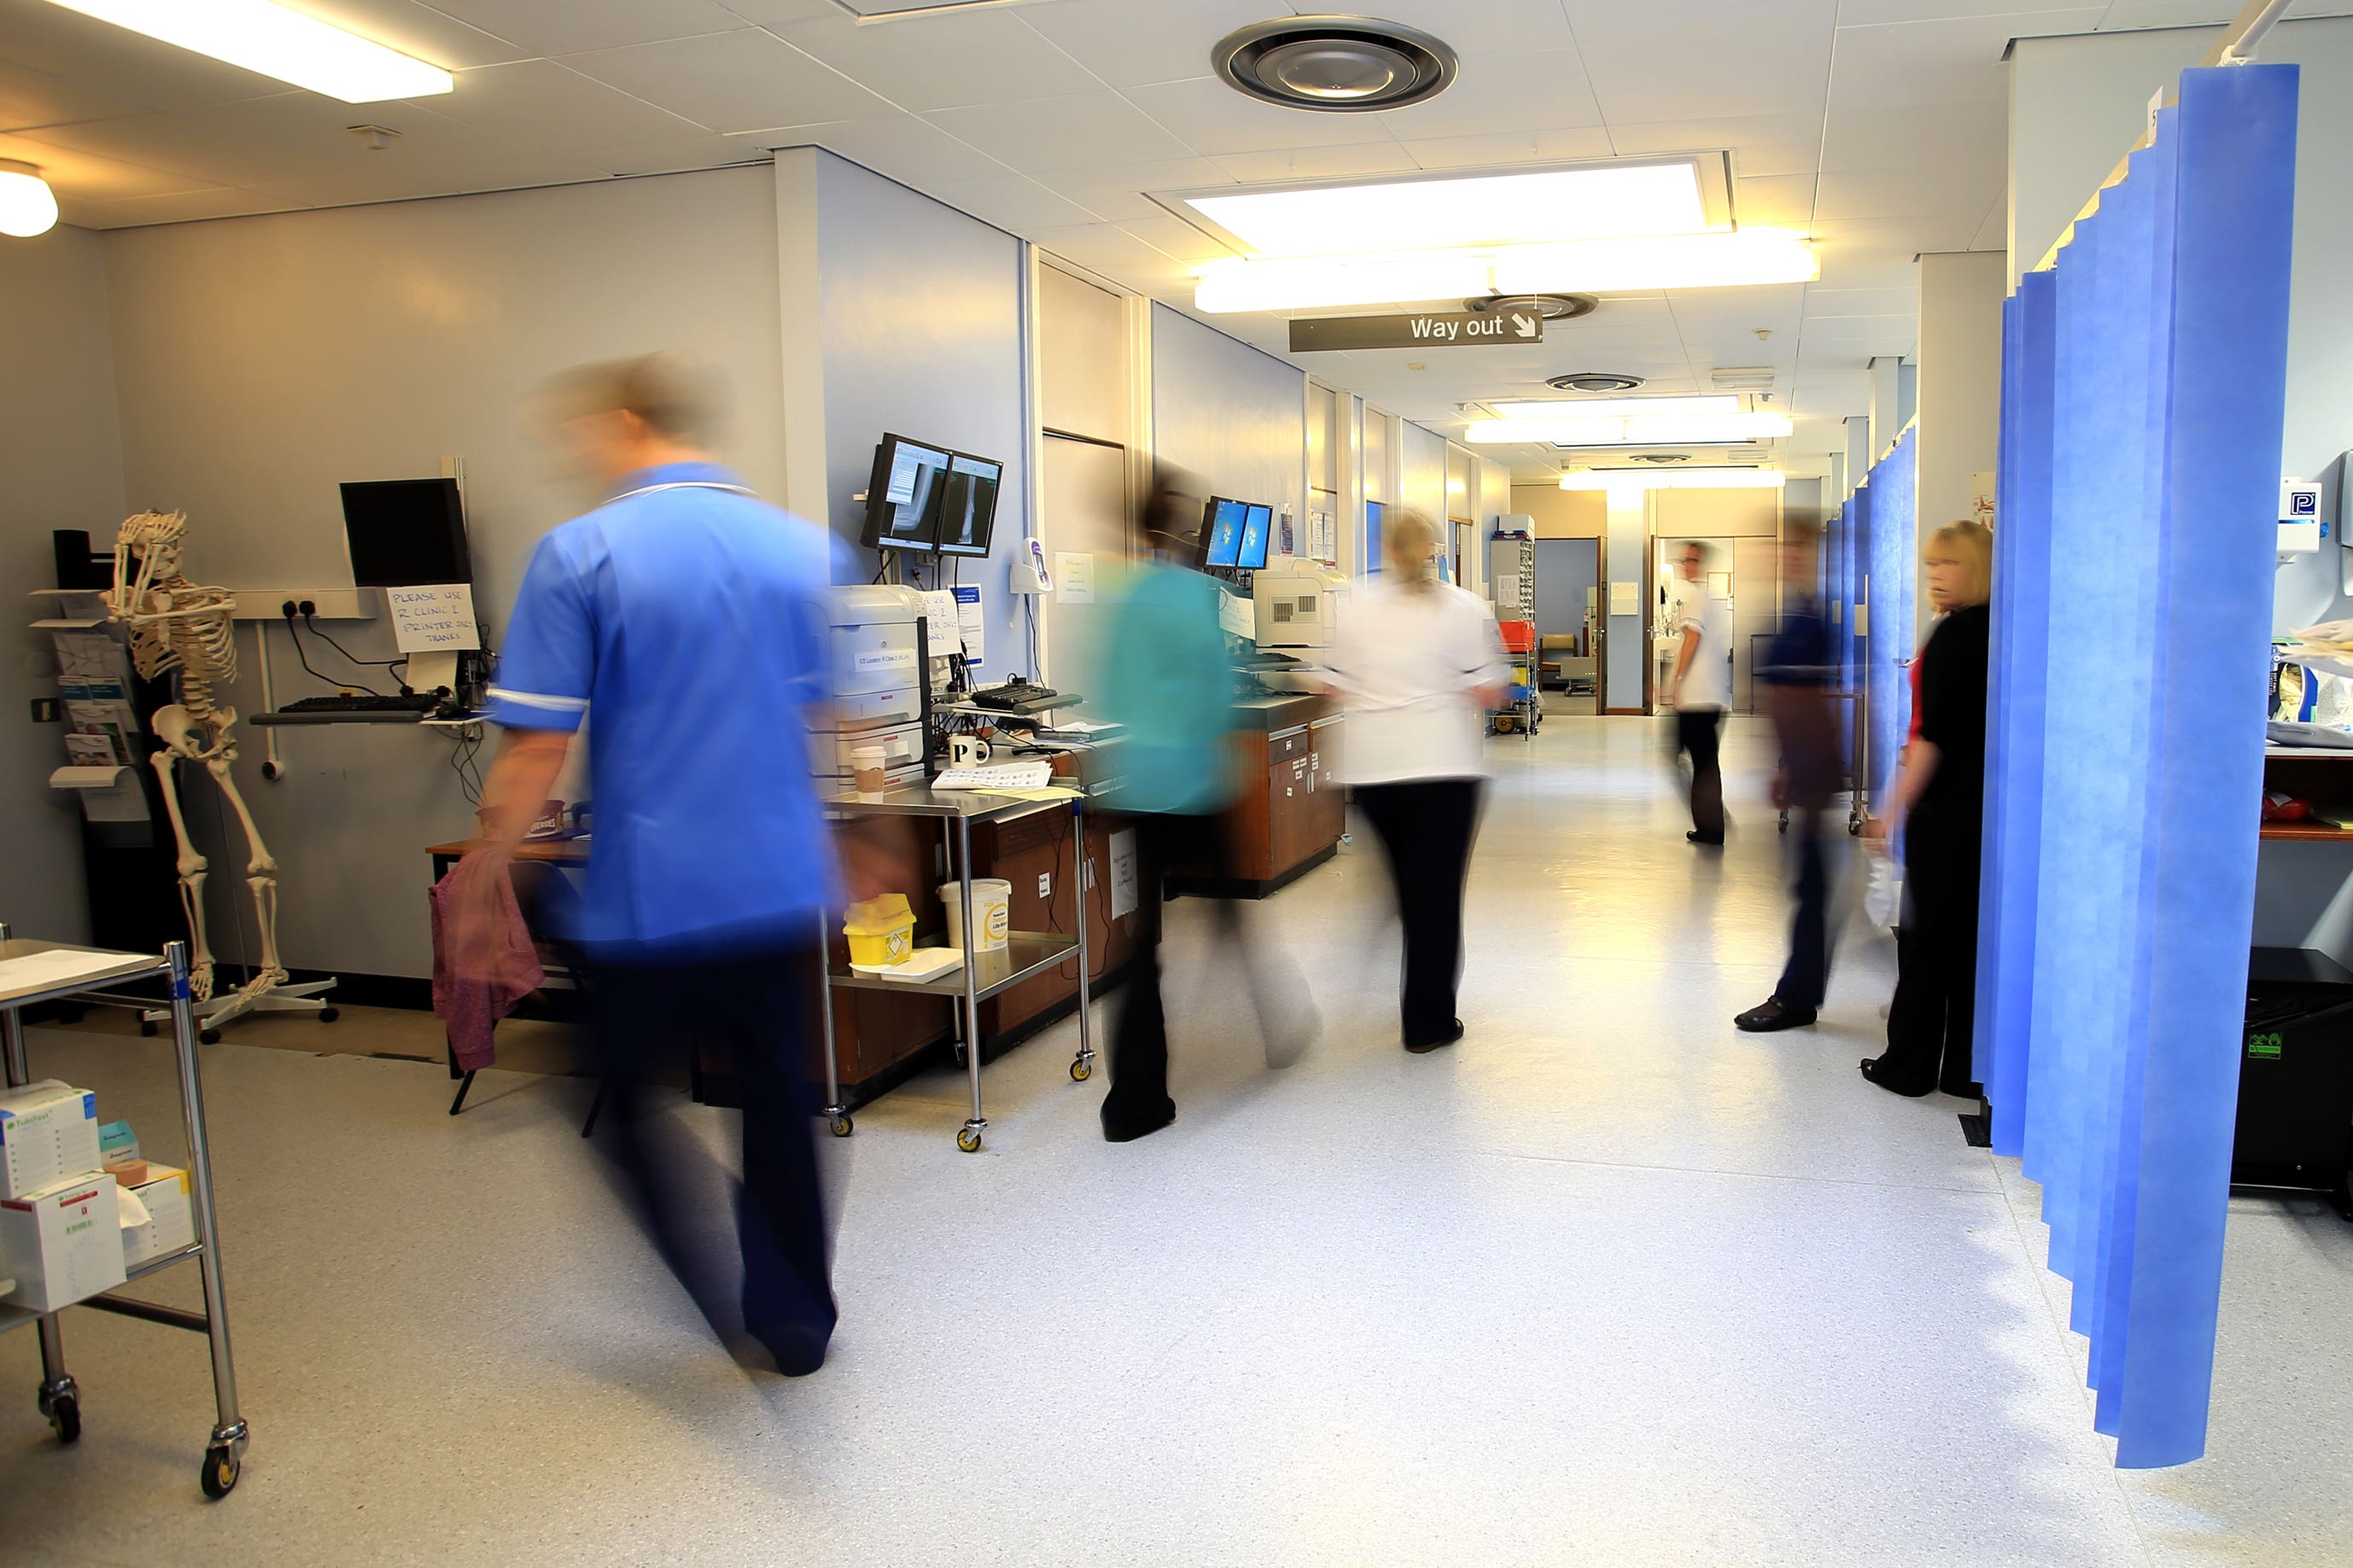 The NHS will be a hot topic of debate between now and the general election